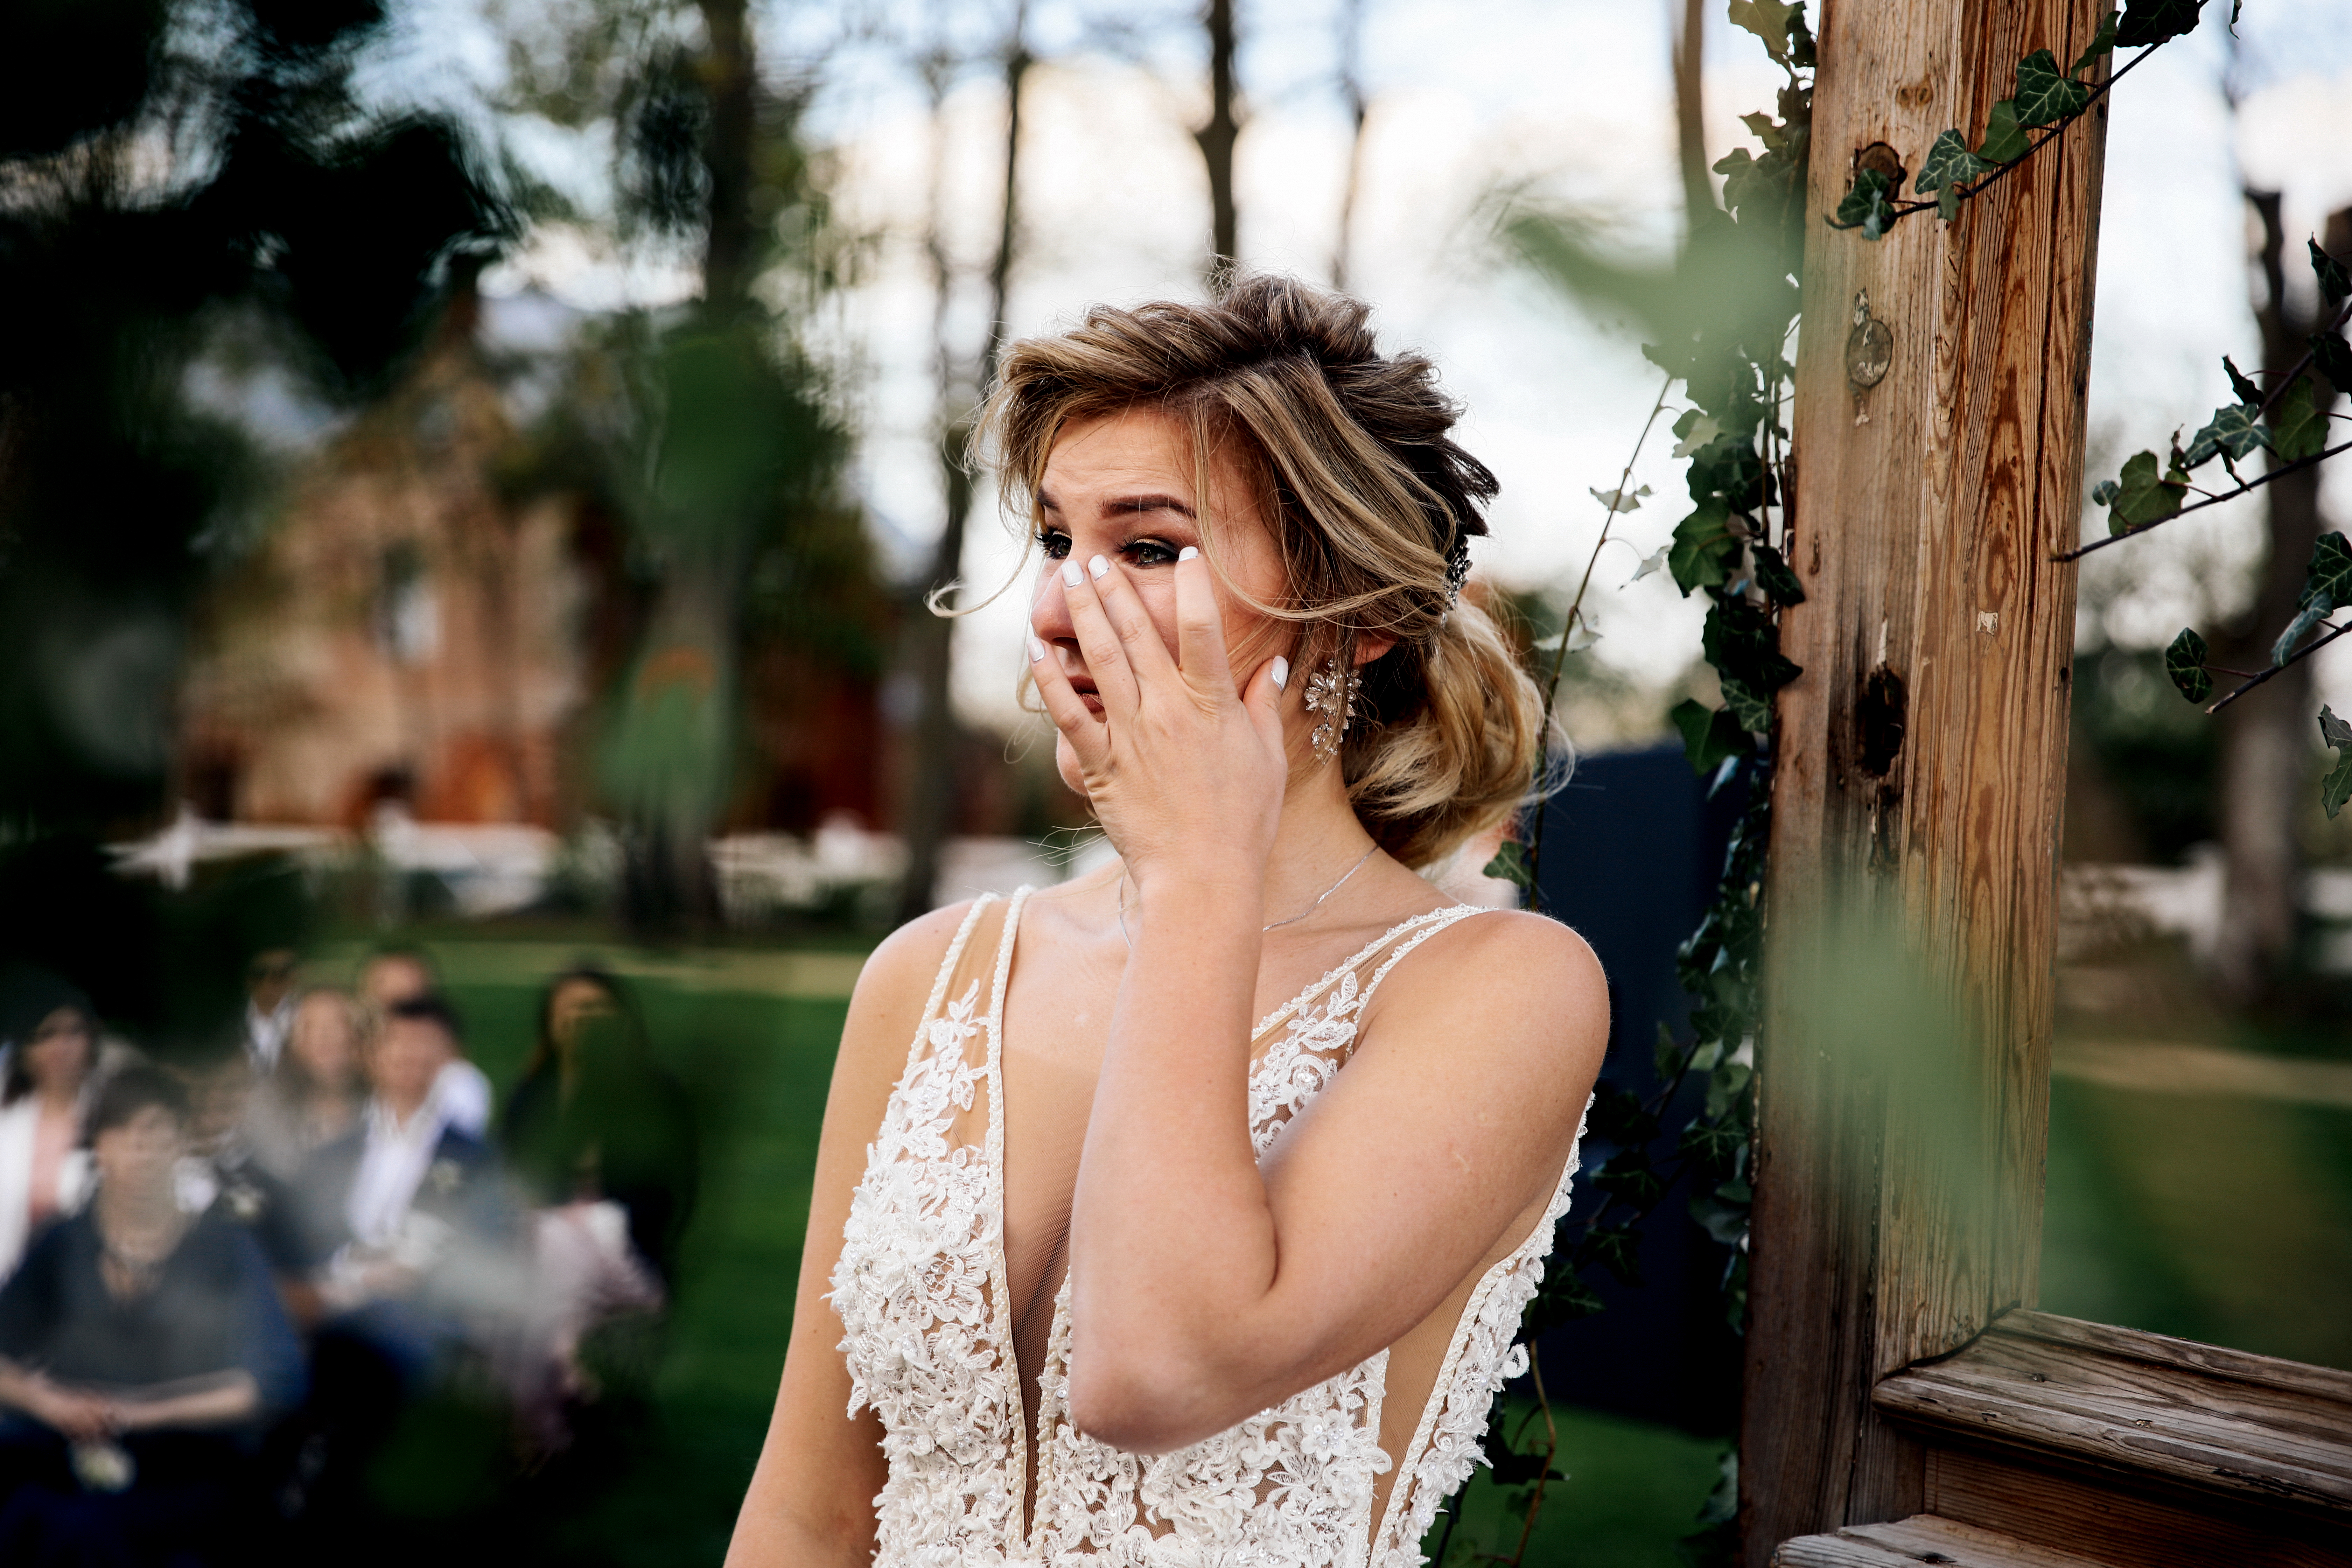 For illustration purposes only. A bride in tears | Source: Pexels